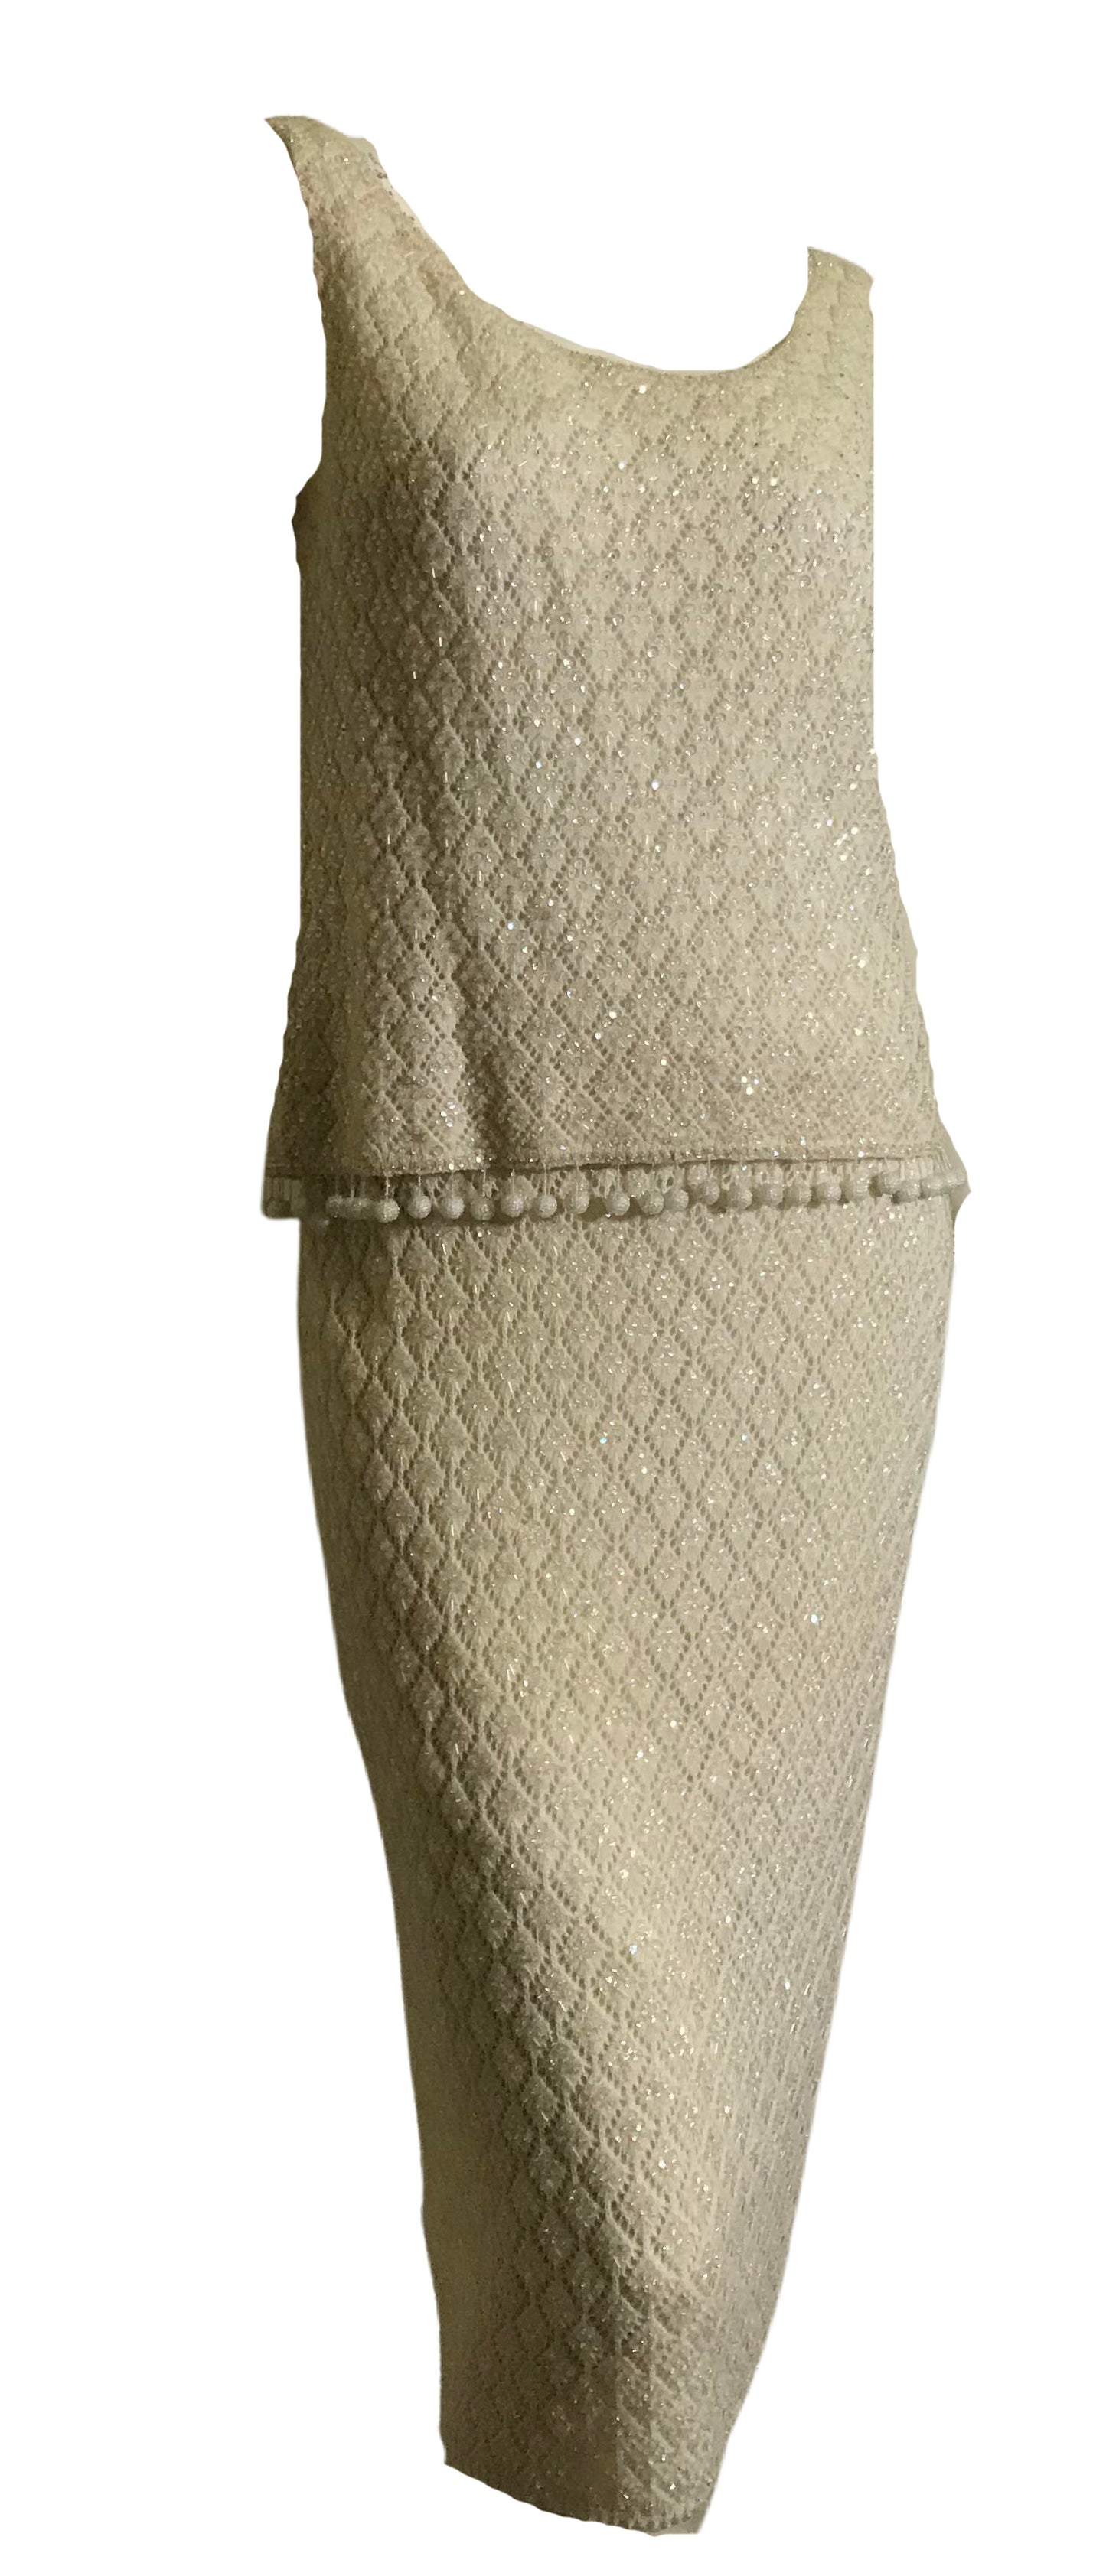 Creamy Knit Wool Beaded and Sequined 2 Pc Dress with Beaded Pom Pom Fringe circa 1960s